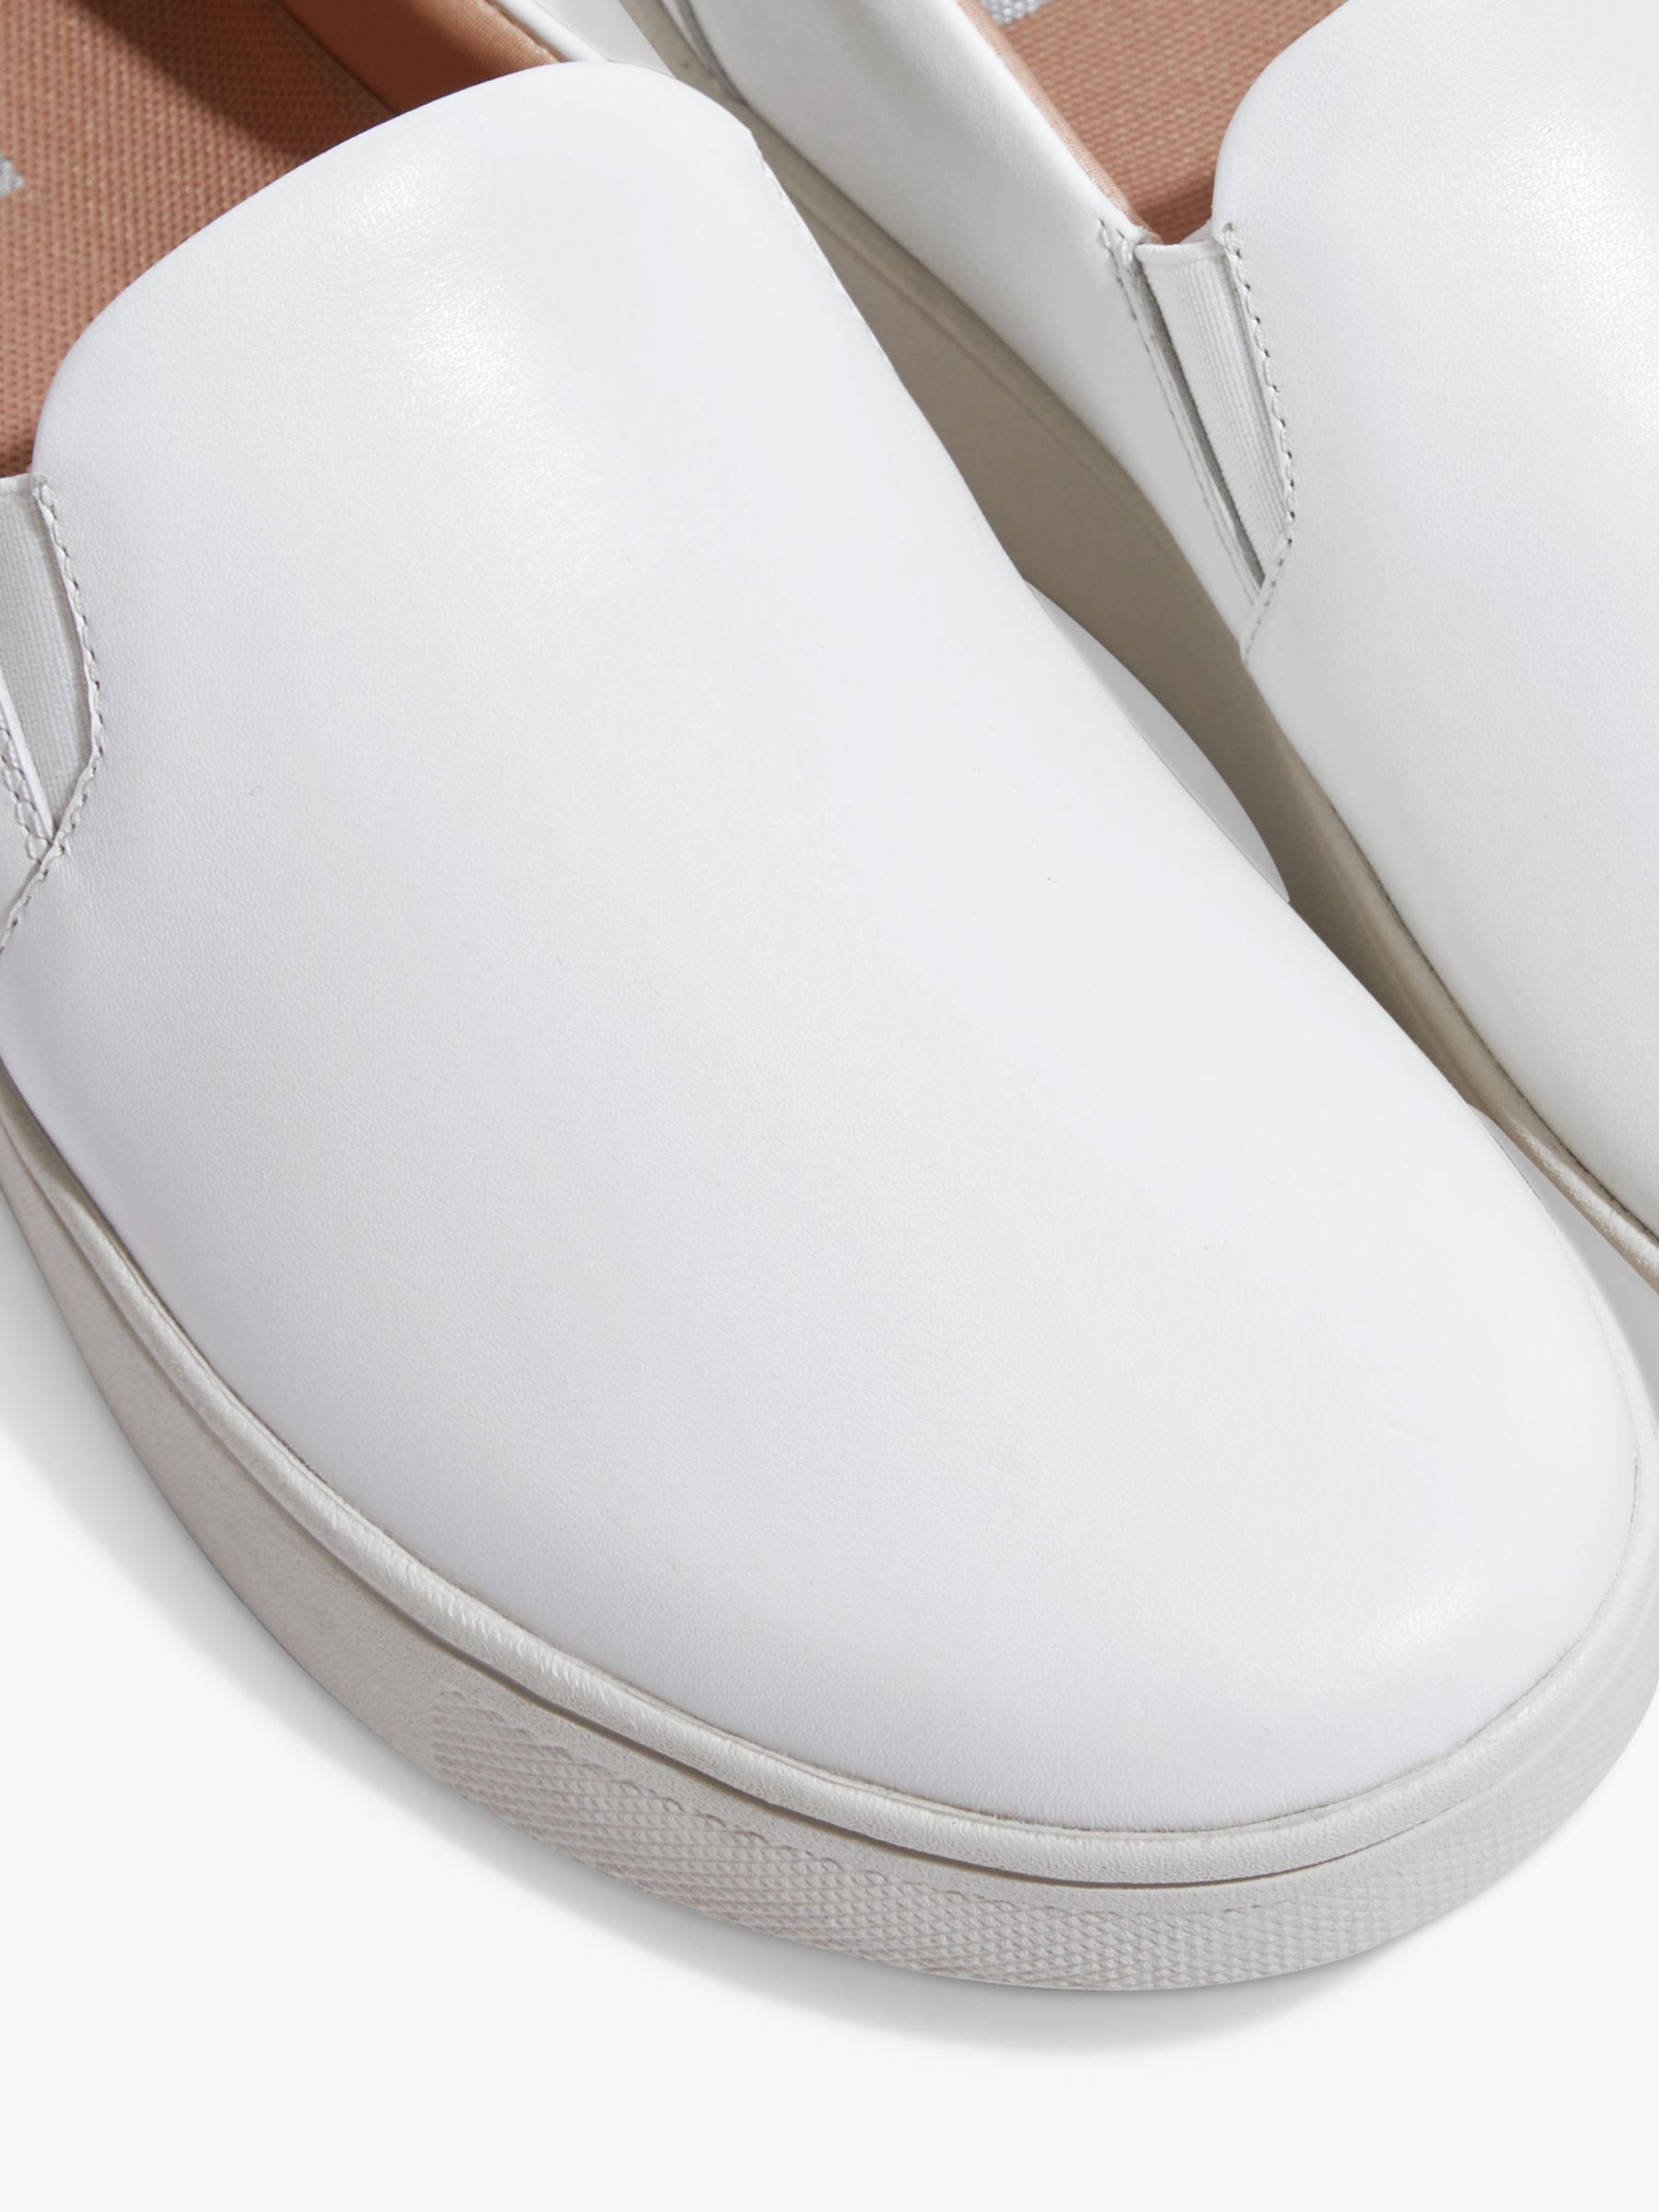 Buy FitFlop Rally Leather Slip On Skate Trainers Online at johnlewis.com